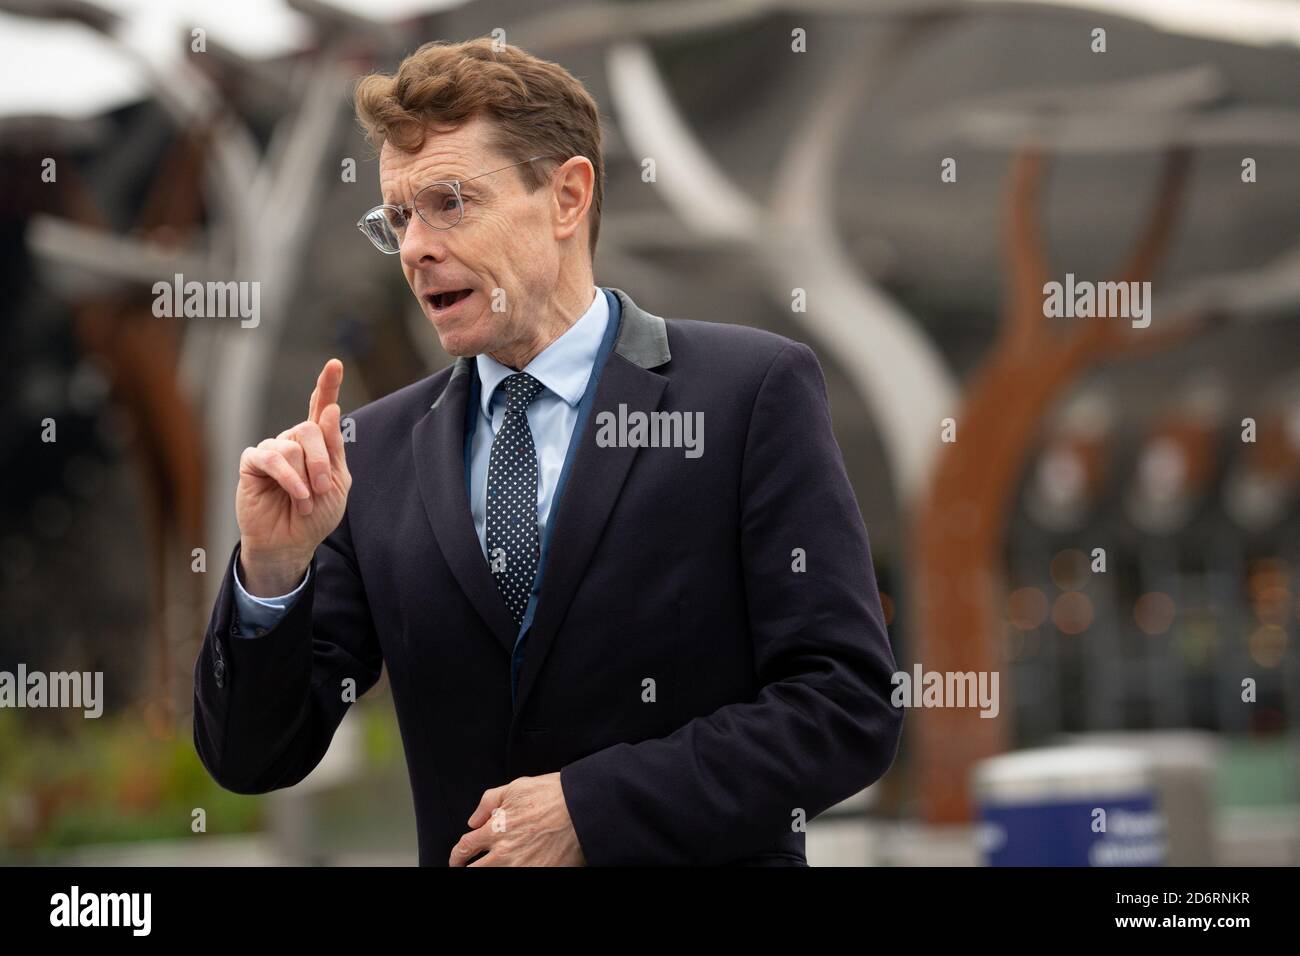 West Midlands Mayor Andy Street speaks to media outside New Street Station in Birmingham, following the news that Home Secretary Priti Patel has agreed to look into calls for a public inquiry into the 1974 Birmingham pub bombings. Stock Photo